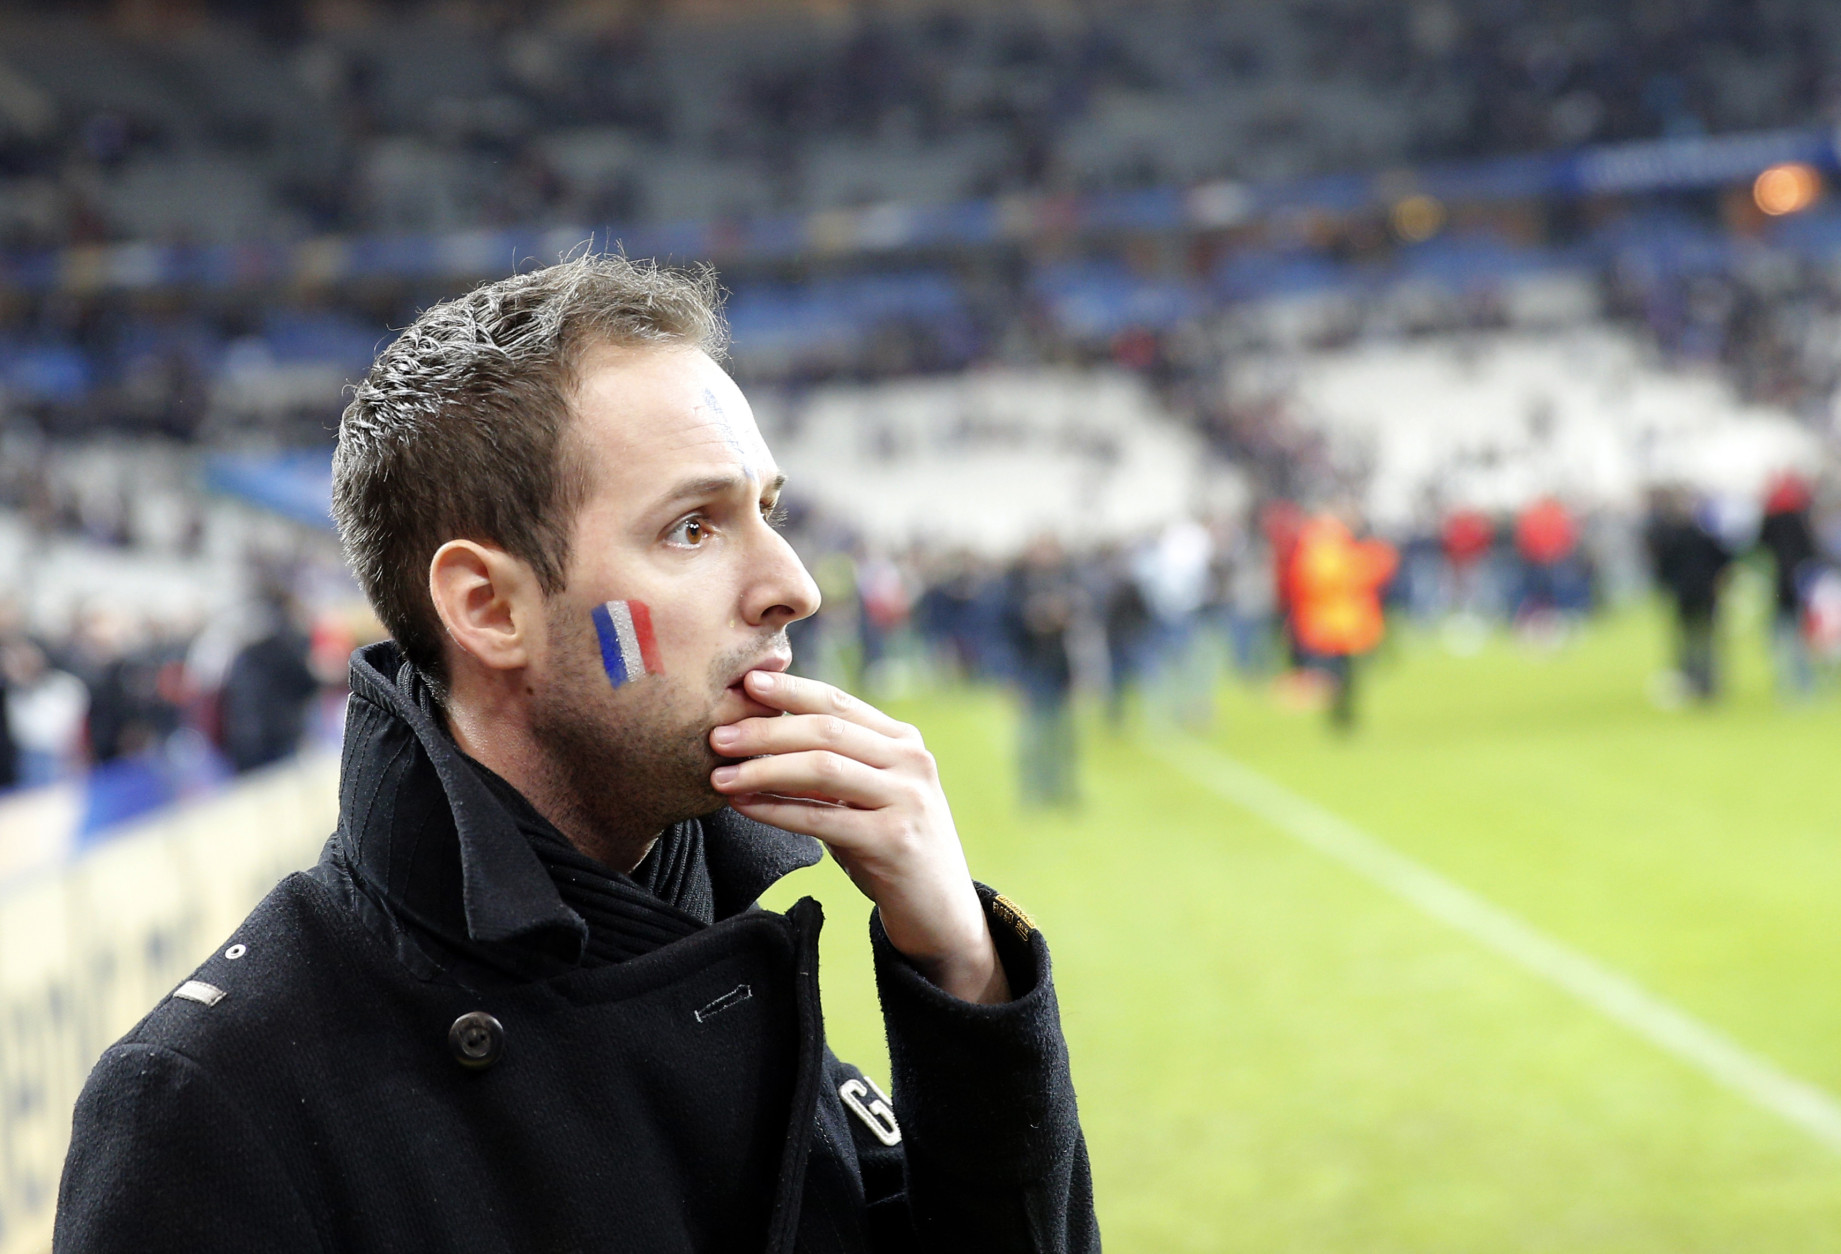 A French supporter reacts after invading the pitch of the Stade de France stadium at the end of the international friendly soccer match between France and Germany in Saint Denis, outside Paris, Friday, Nov. 13, 2015. Hundreds of people spilled onto the field of the Stade de France stadium after explosions were heard nearby. French President Francois Hollande says he is closing the country's borders and declaring a state of emergency after several dozen people were killed in a series of unprecedented terrorist attacks. (AP Photo/Christophe Ena)